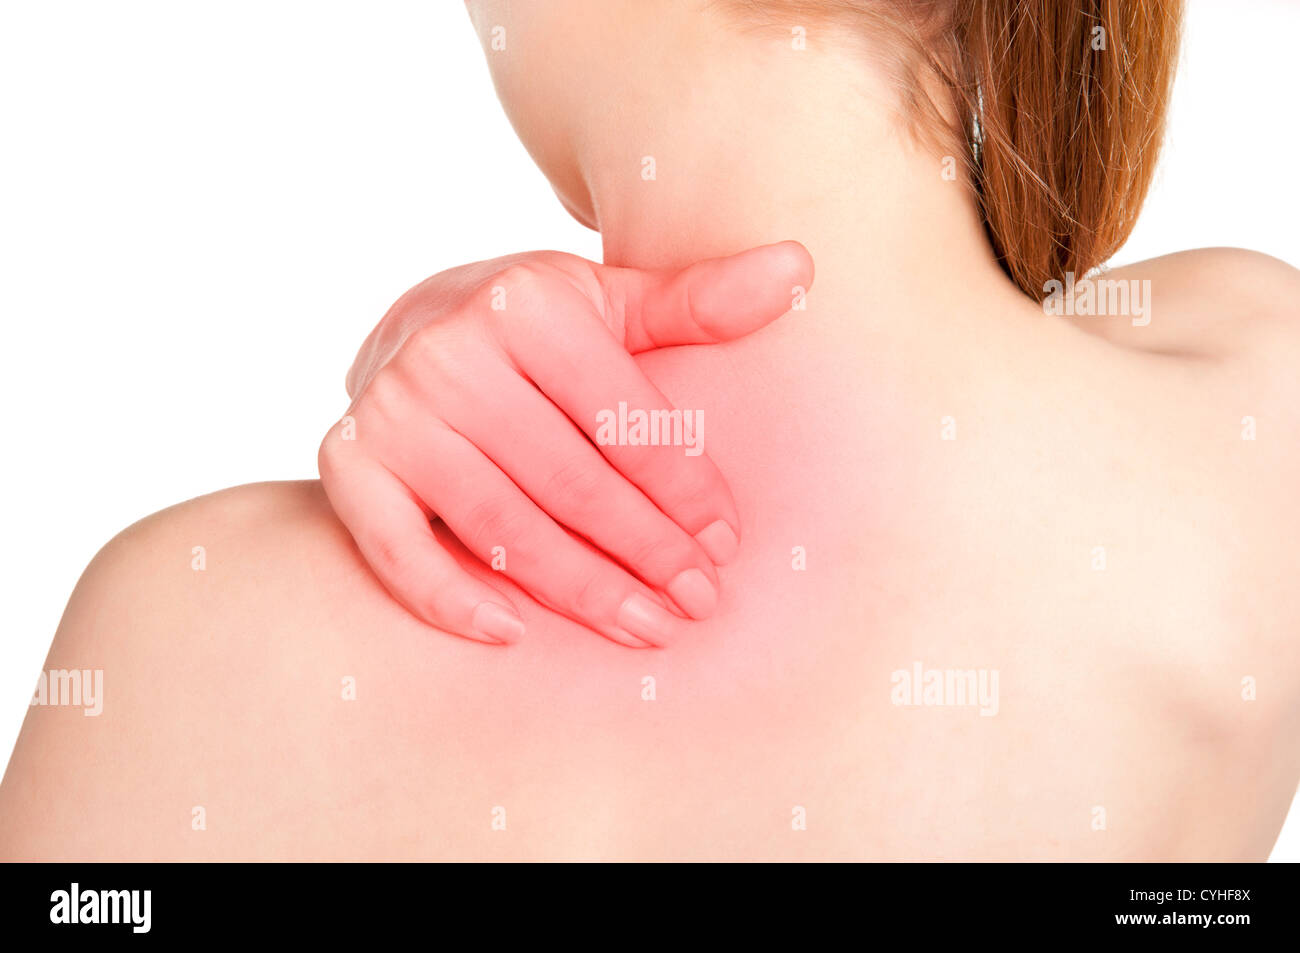 Young woman with pain in the back of her neck. Red around the pain area. Stock Photo